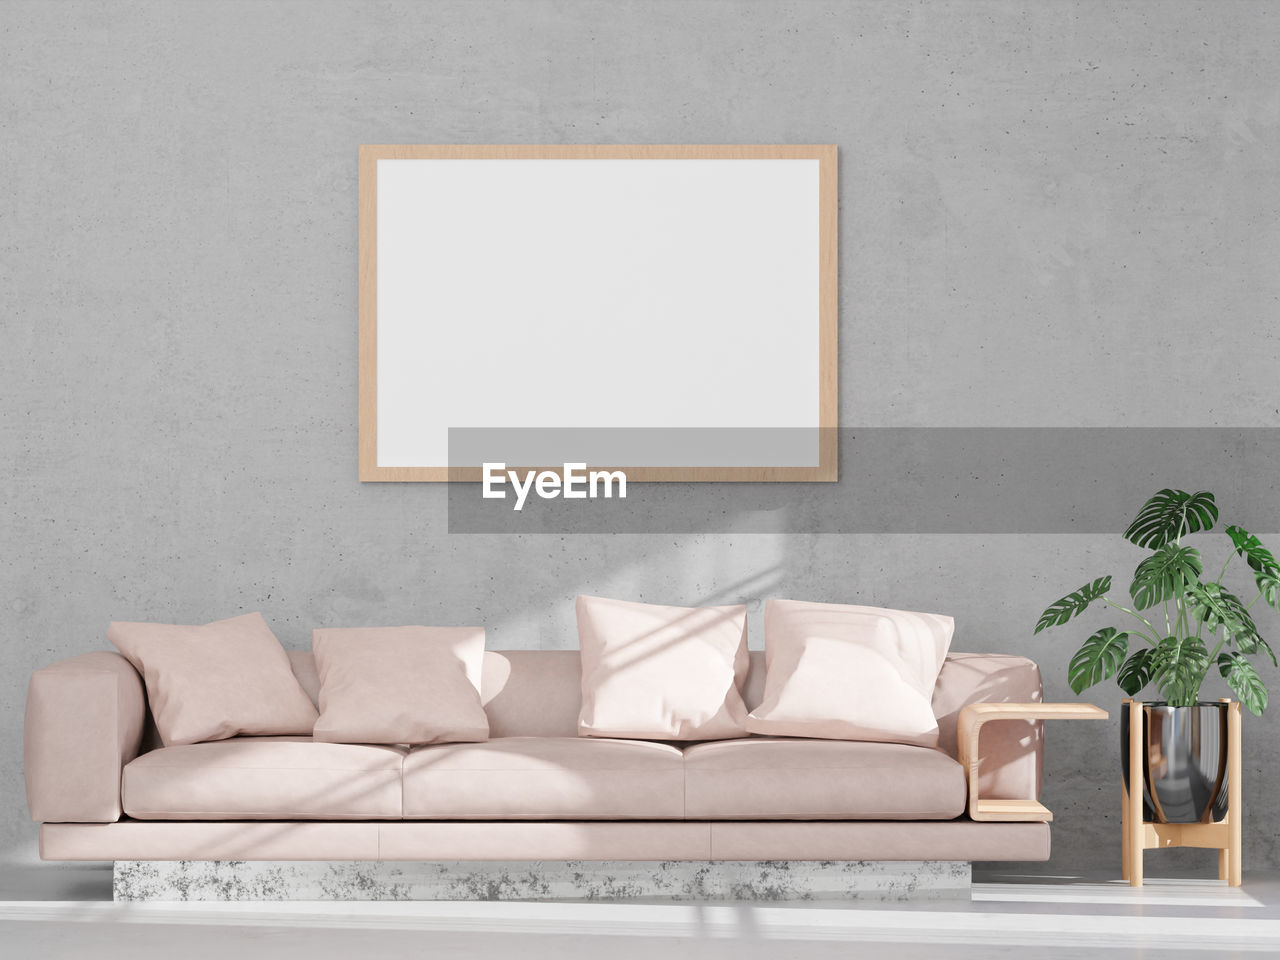 Loft style living room and concrete wall sofa mock up frame